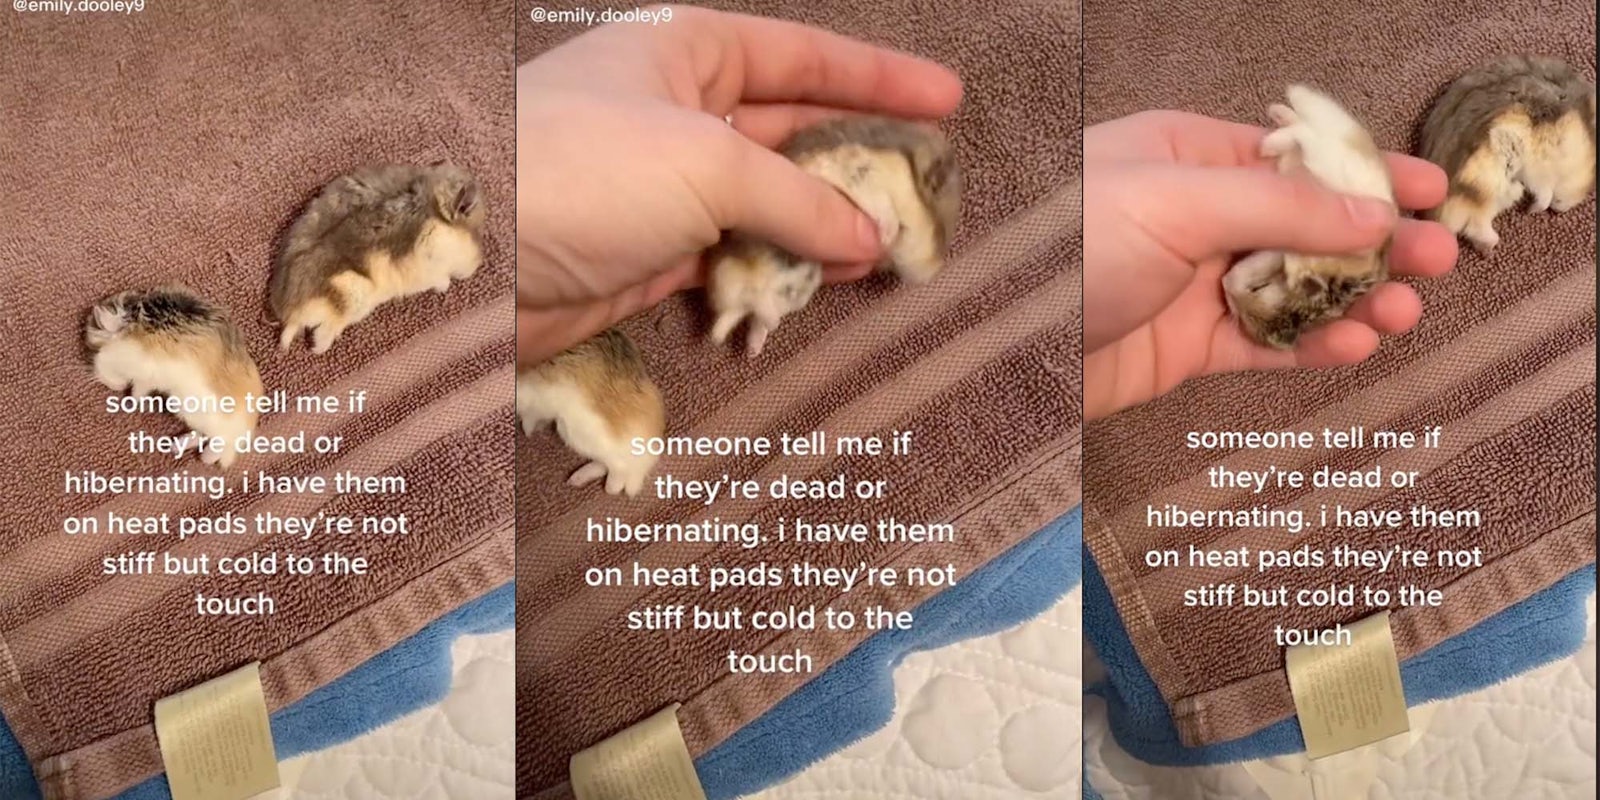 A TikToker asks followers if they think her hamsters are dead or just hibernating.